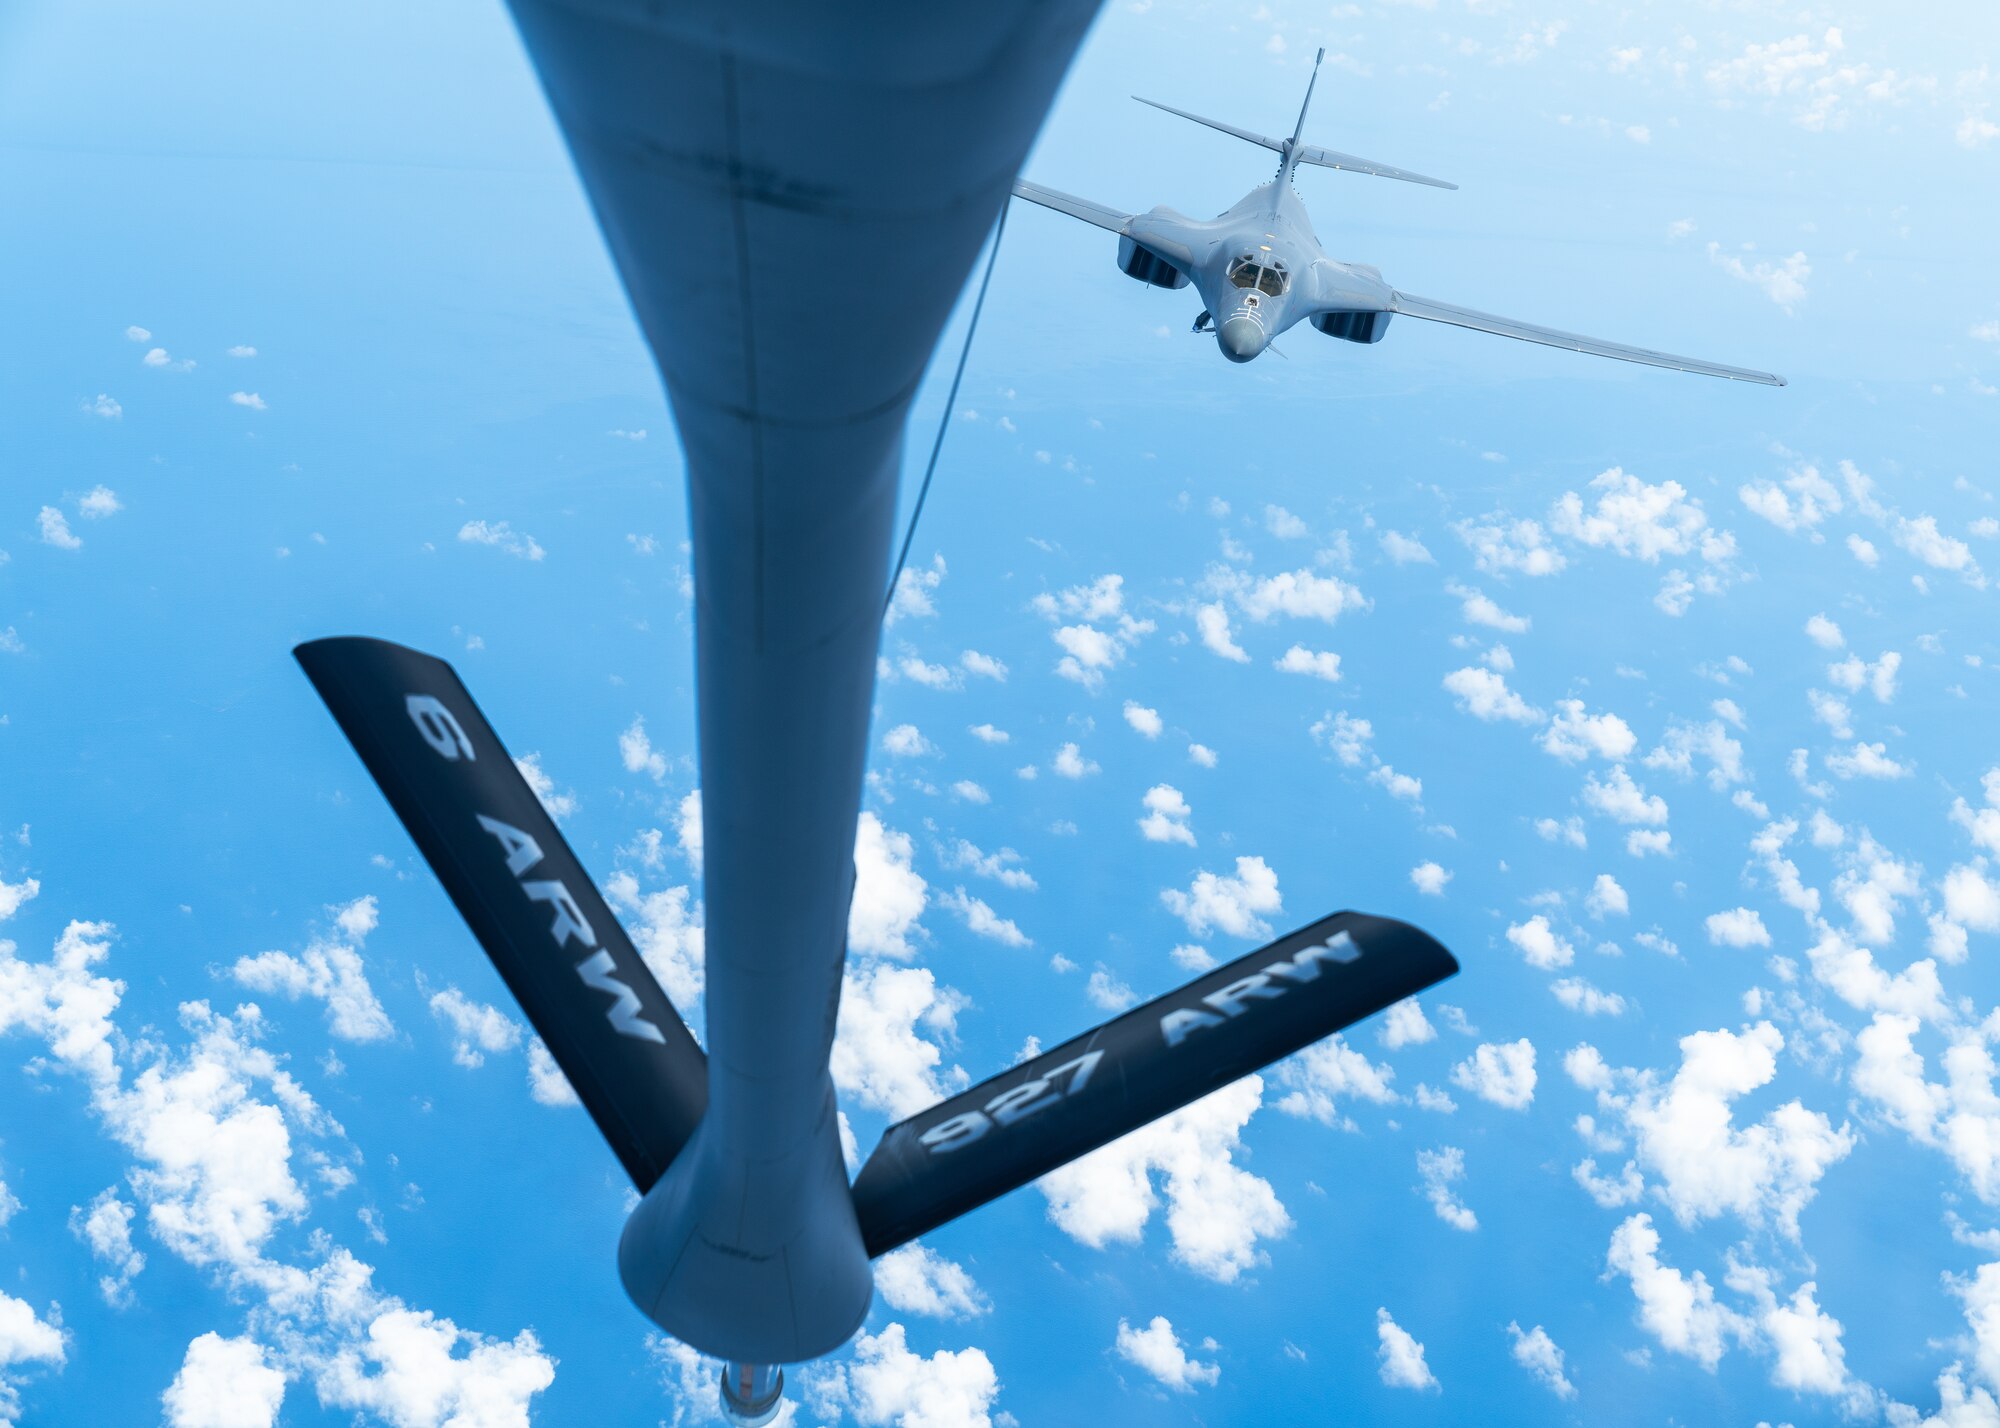 A B-1B Lancer aircraft assigned to the 7th Bomb Wing, Dyess Air Force Base, Texas, approaches a KC-135 Stratotanker aircraft assigned to the 927th Air Refueling Wing, MacDill AFB, Florida, to receive fuel over the Caribbean Sea, Sept. 7, 2022. The air operations between 12th Air Force and Air Mobility Command were part of a Partner Interoperability Training exercise with Panama and Ecuador to grow capacity, enhance the ability to respond to illegal fishing practices and maintain shared interest in regional security. Multilateral engagements such as this one ensures maximum resource efficiency and enable the consistent training between U.S. Southern Command, component command and partner nations. (U.S. Air Force photo by Airman 1st Class Joshua Hastings)